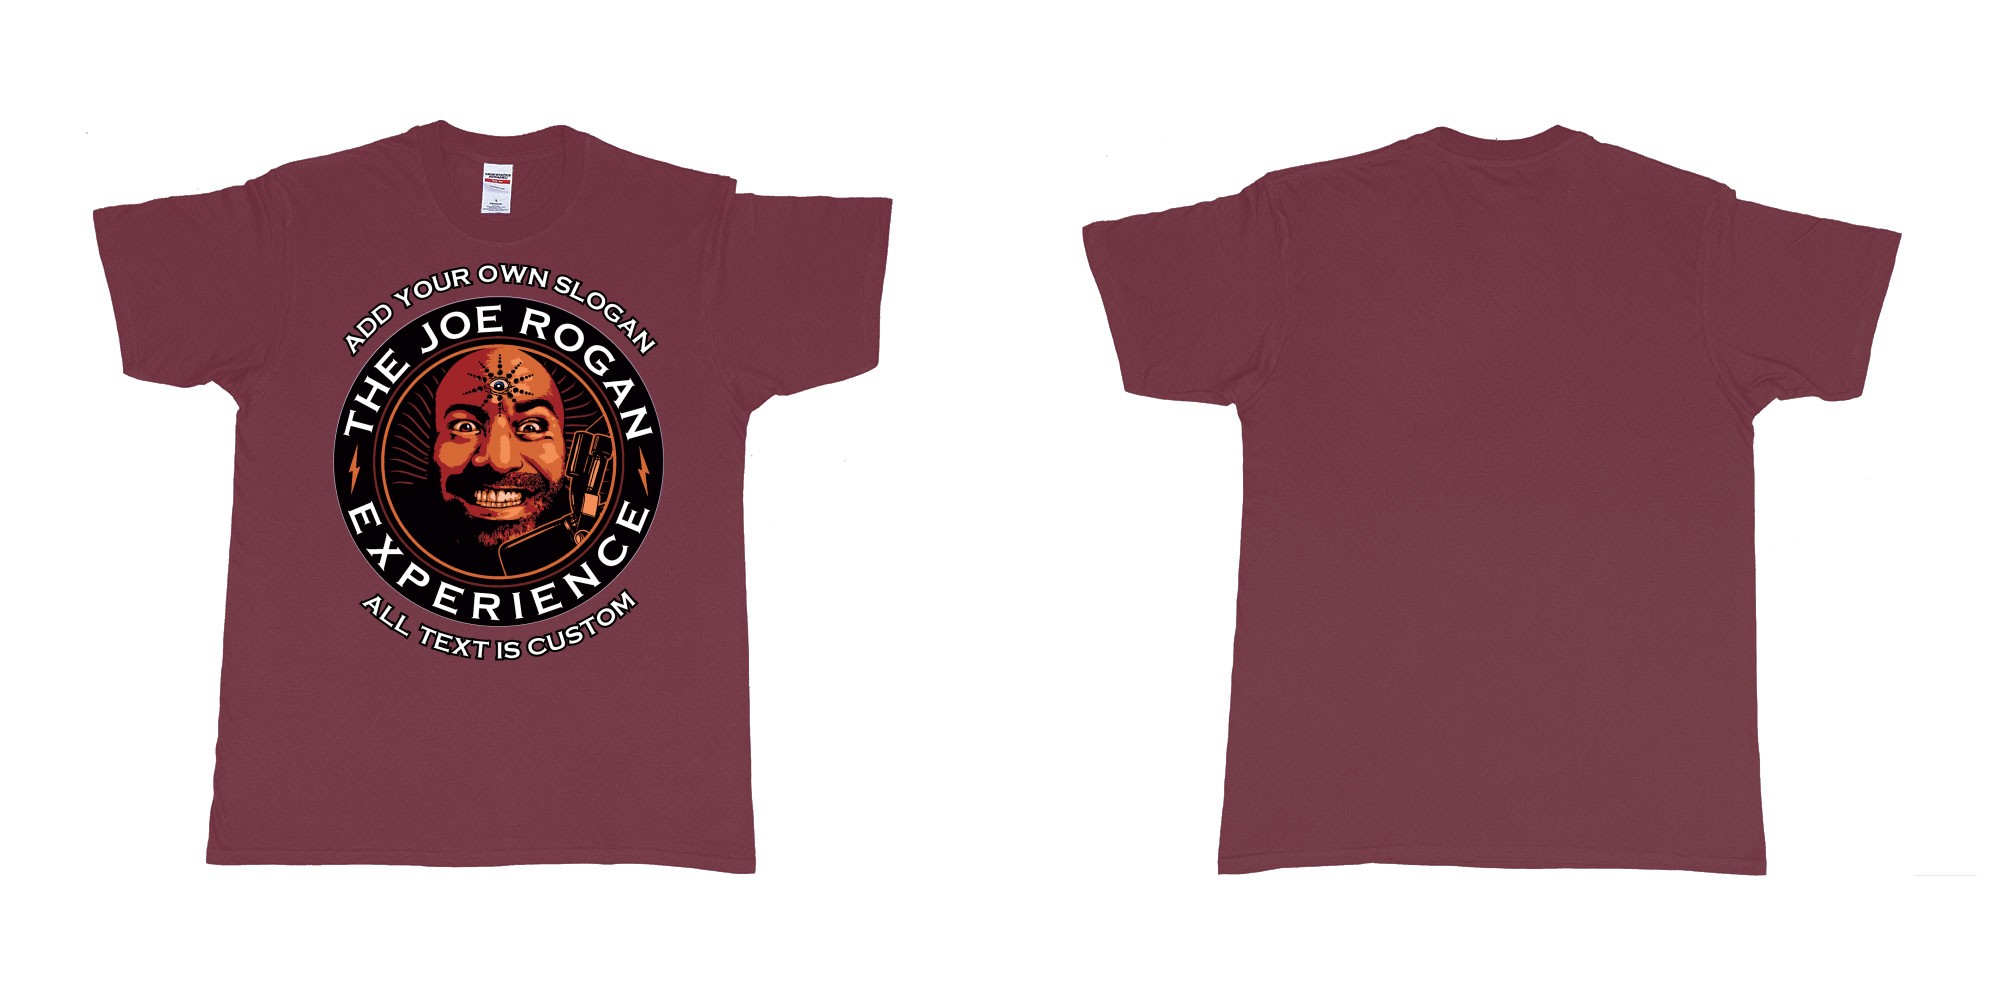 Custom tshirt design the joe rogan experience custom tshirt in fabric color marron choice your own text made in Bali by The Pirate Way